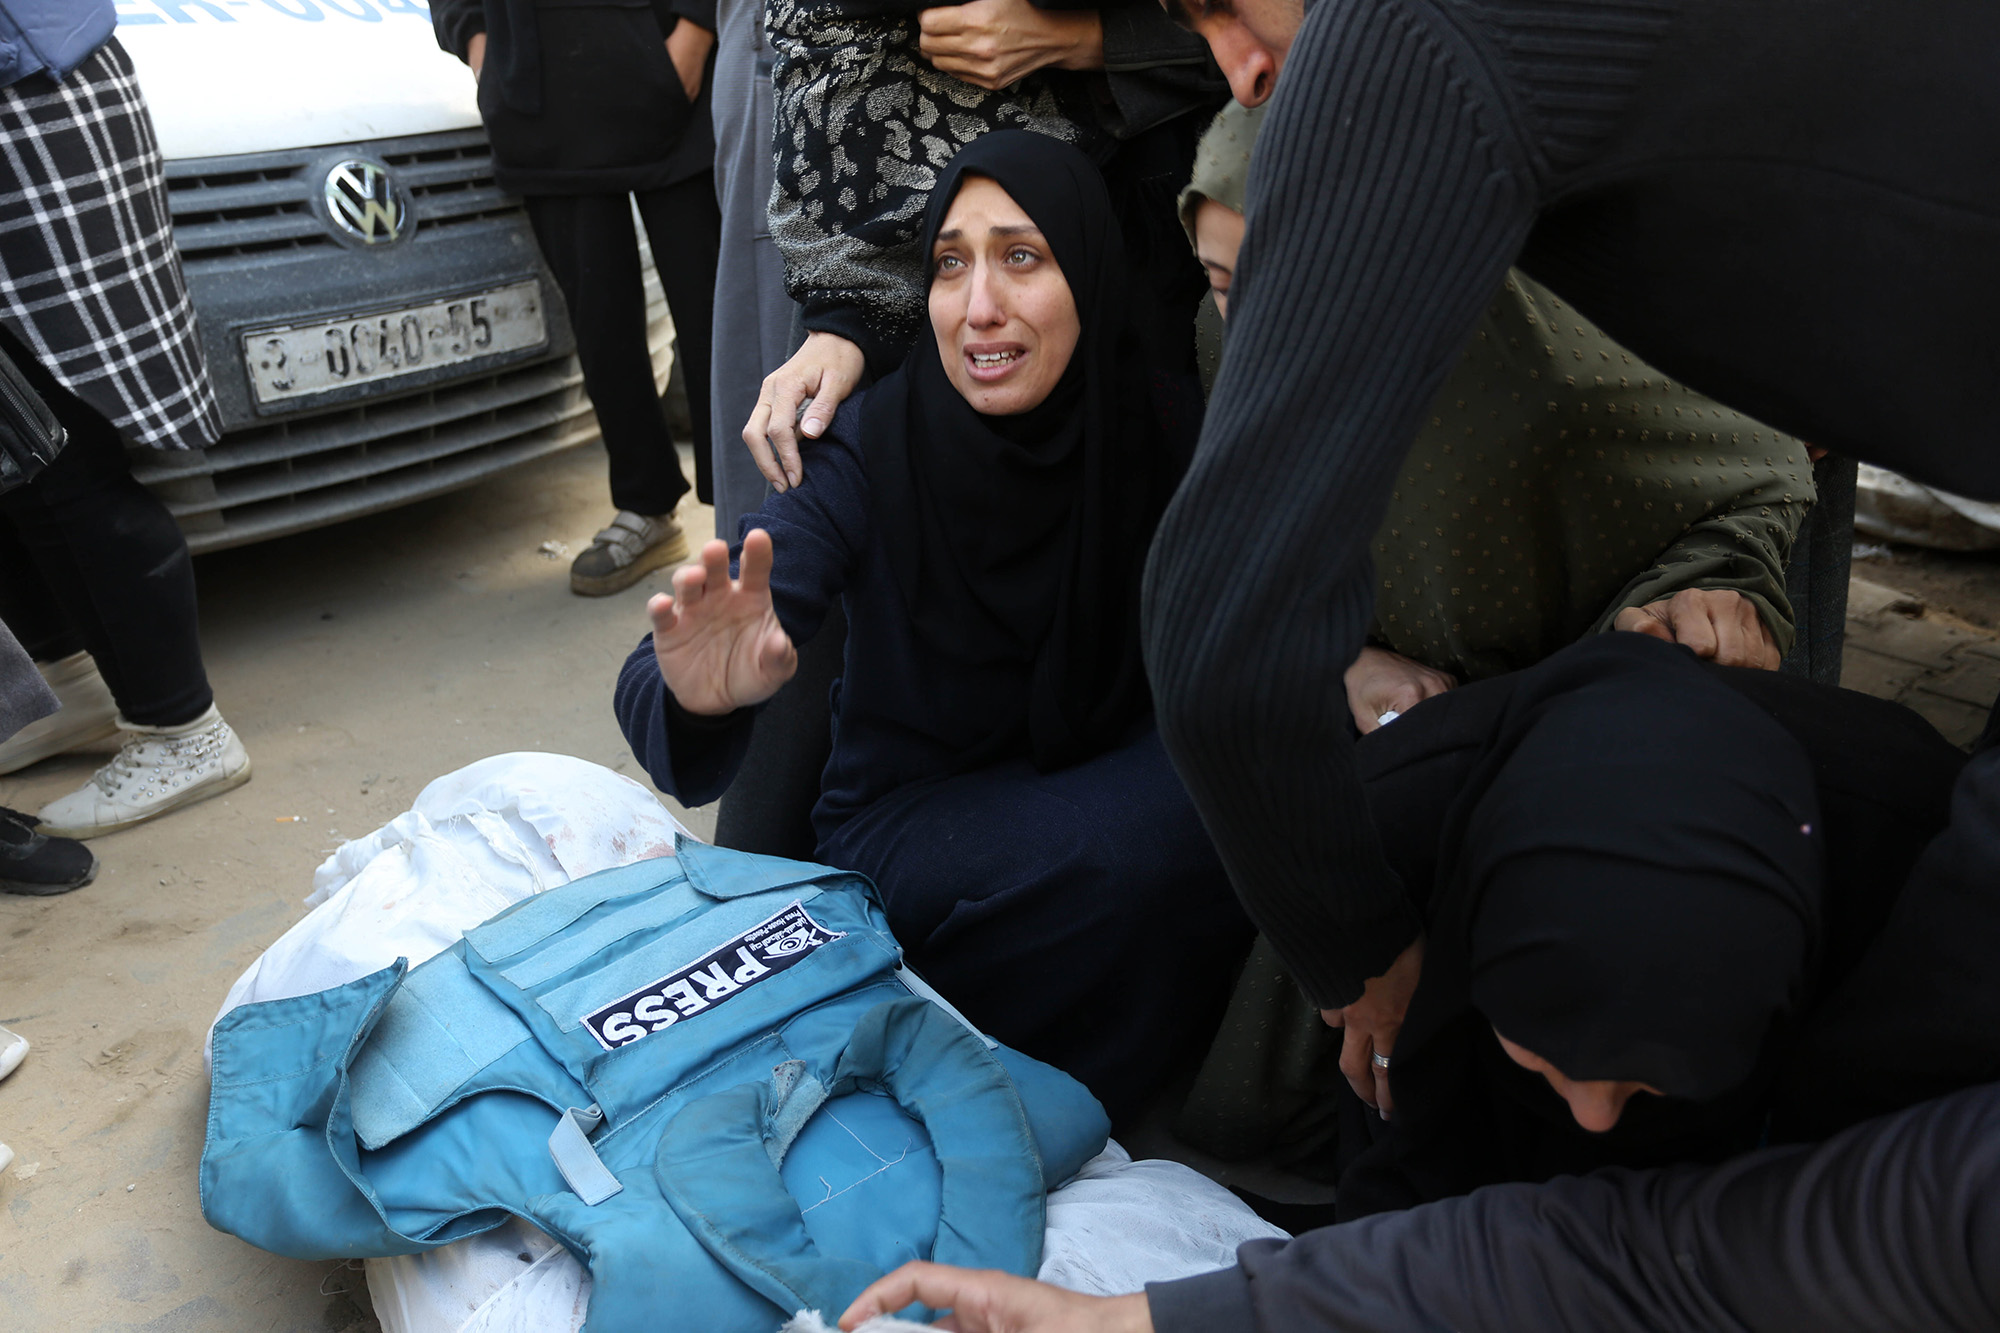 Relatives, loved ones and colleagues of Al-Aqsa TV anchor and journalist Mohammed Salamah attend his funeral ceremony held in front of Al-Aqsa Martyrs Hospital in Deir Al Balah, Gaza, on March 6.